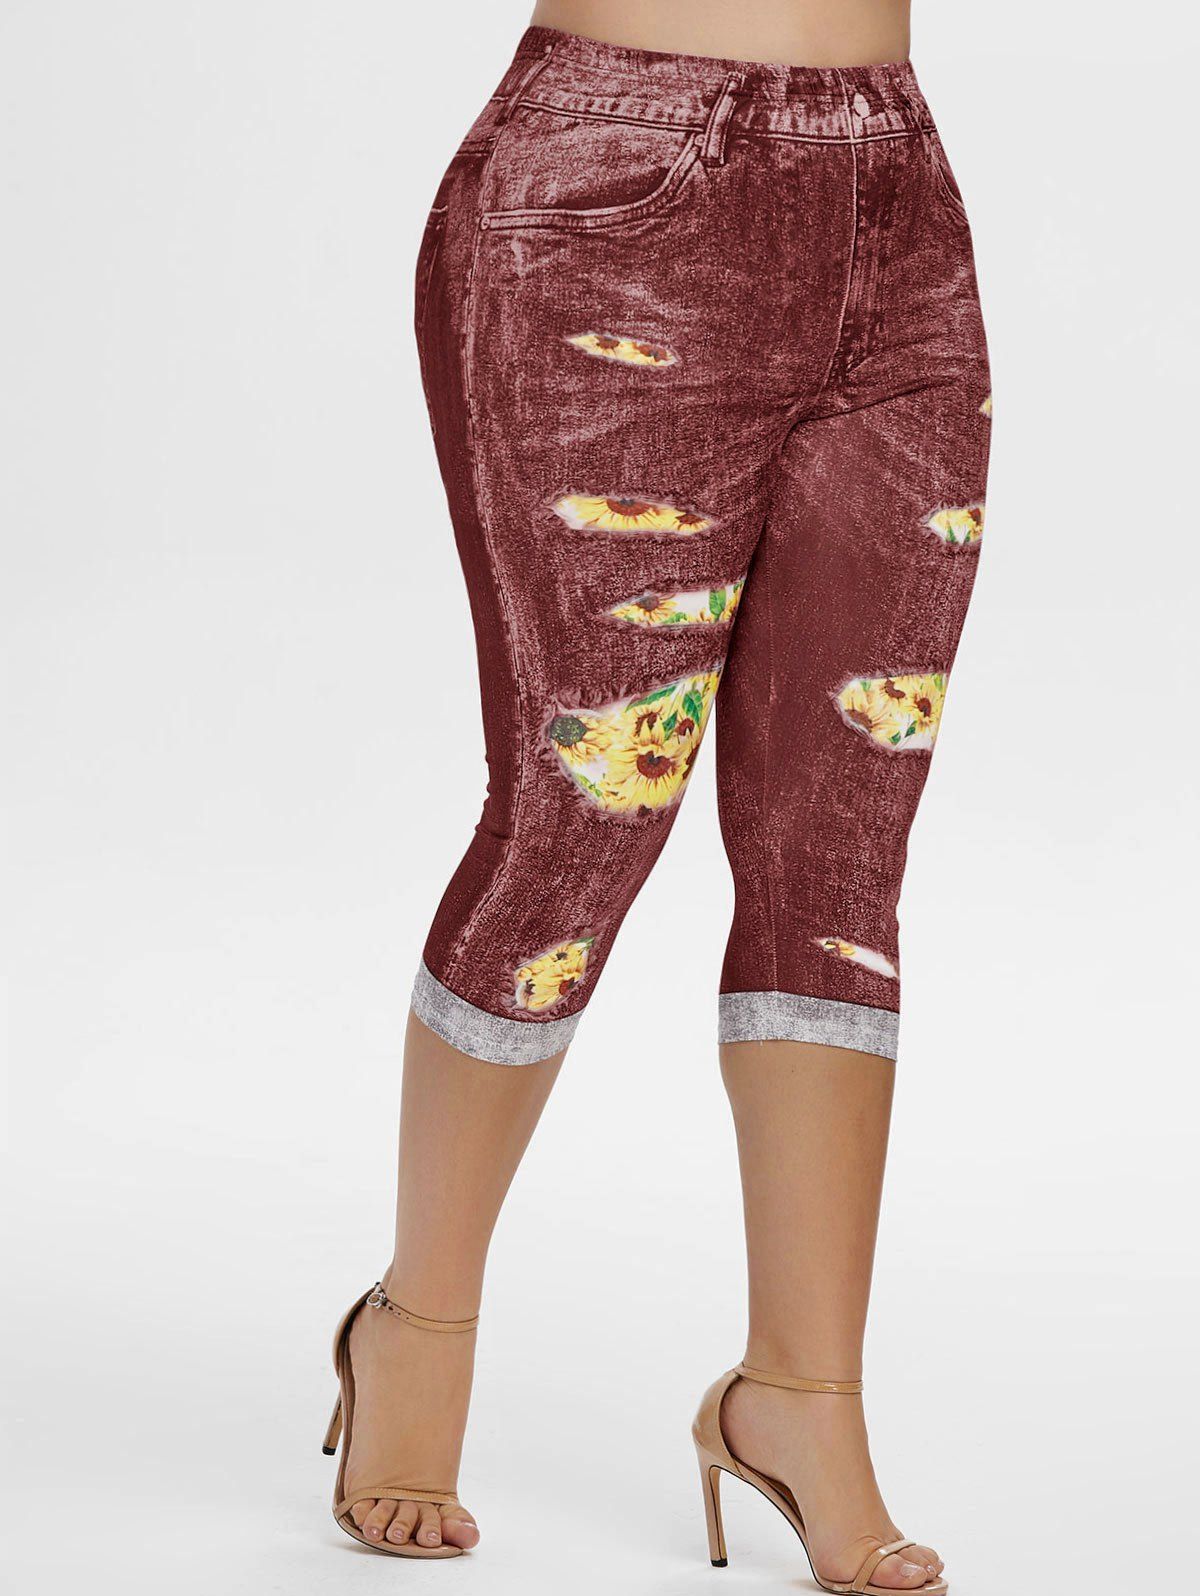 3D Sunflower High Waisted Plus Size Capri Jeggings - RED WINE 5X